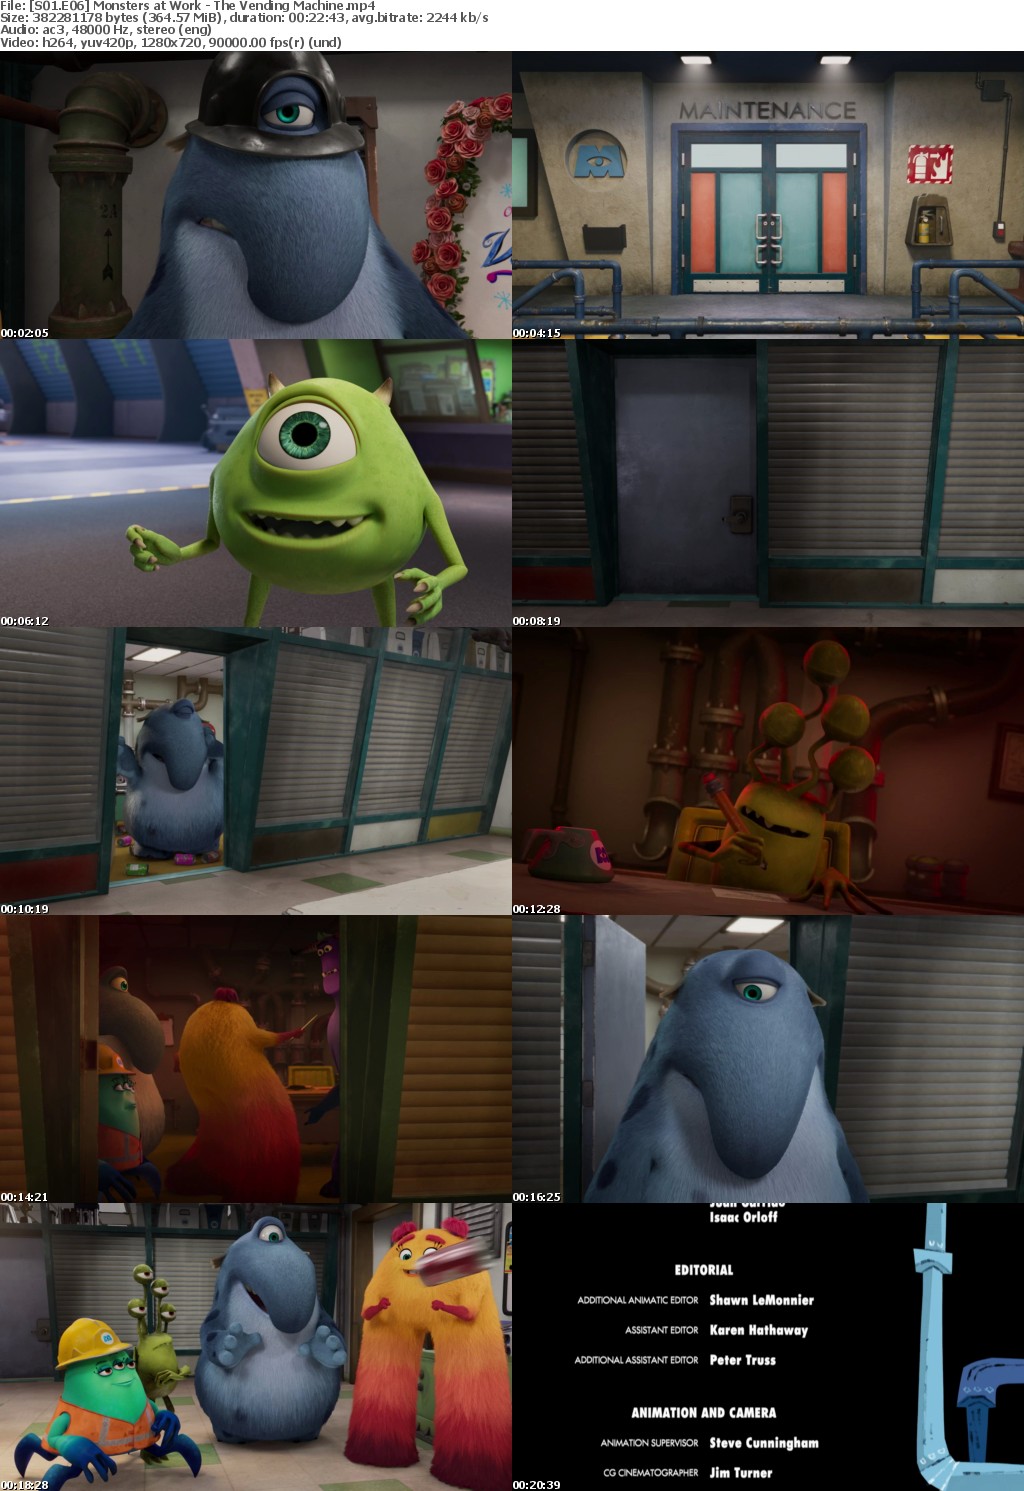 Monsters at Work S1 E6 The Vending Machine MP4 720p H264 WEBRip EzzRips